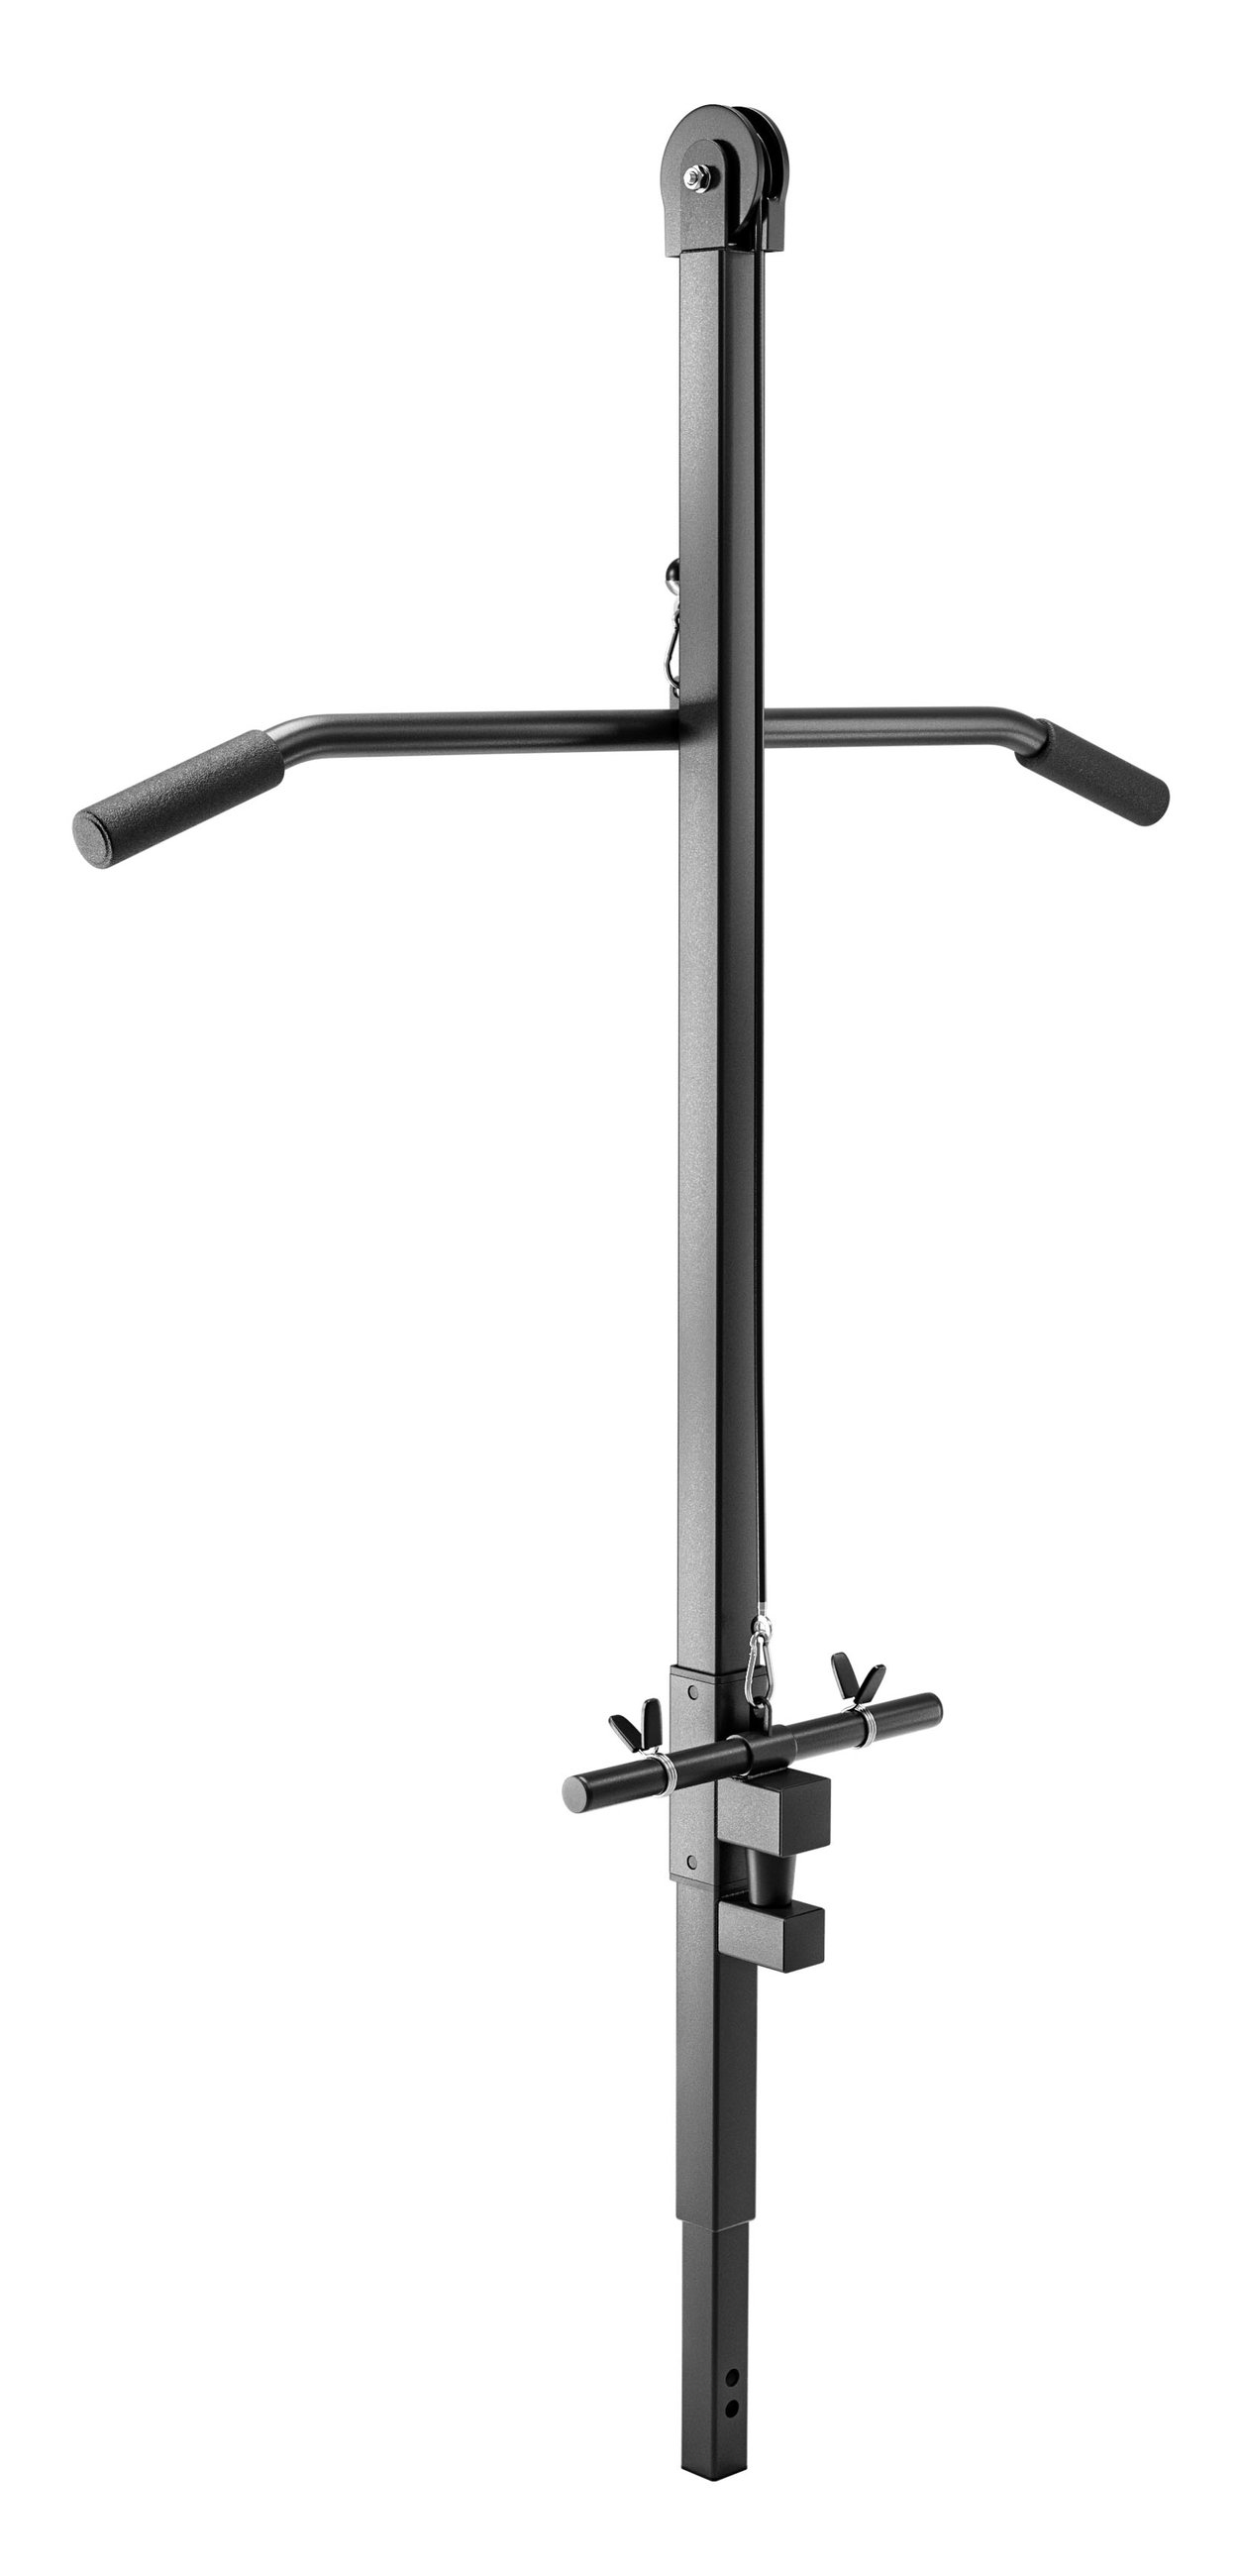 Lat Pulldown Attachment for Weight Benches 1075, 1065HB, 1055,TX-020